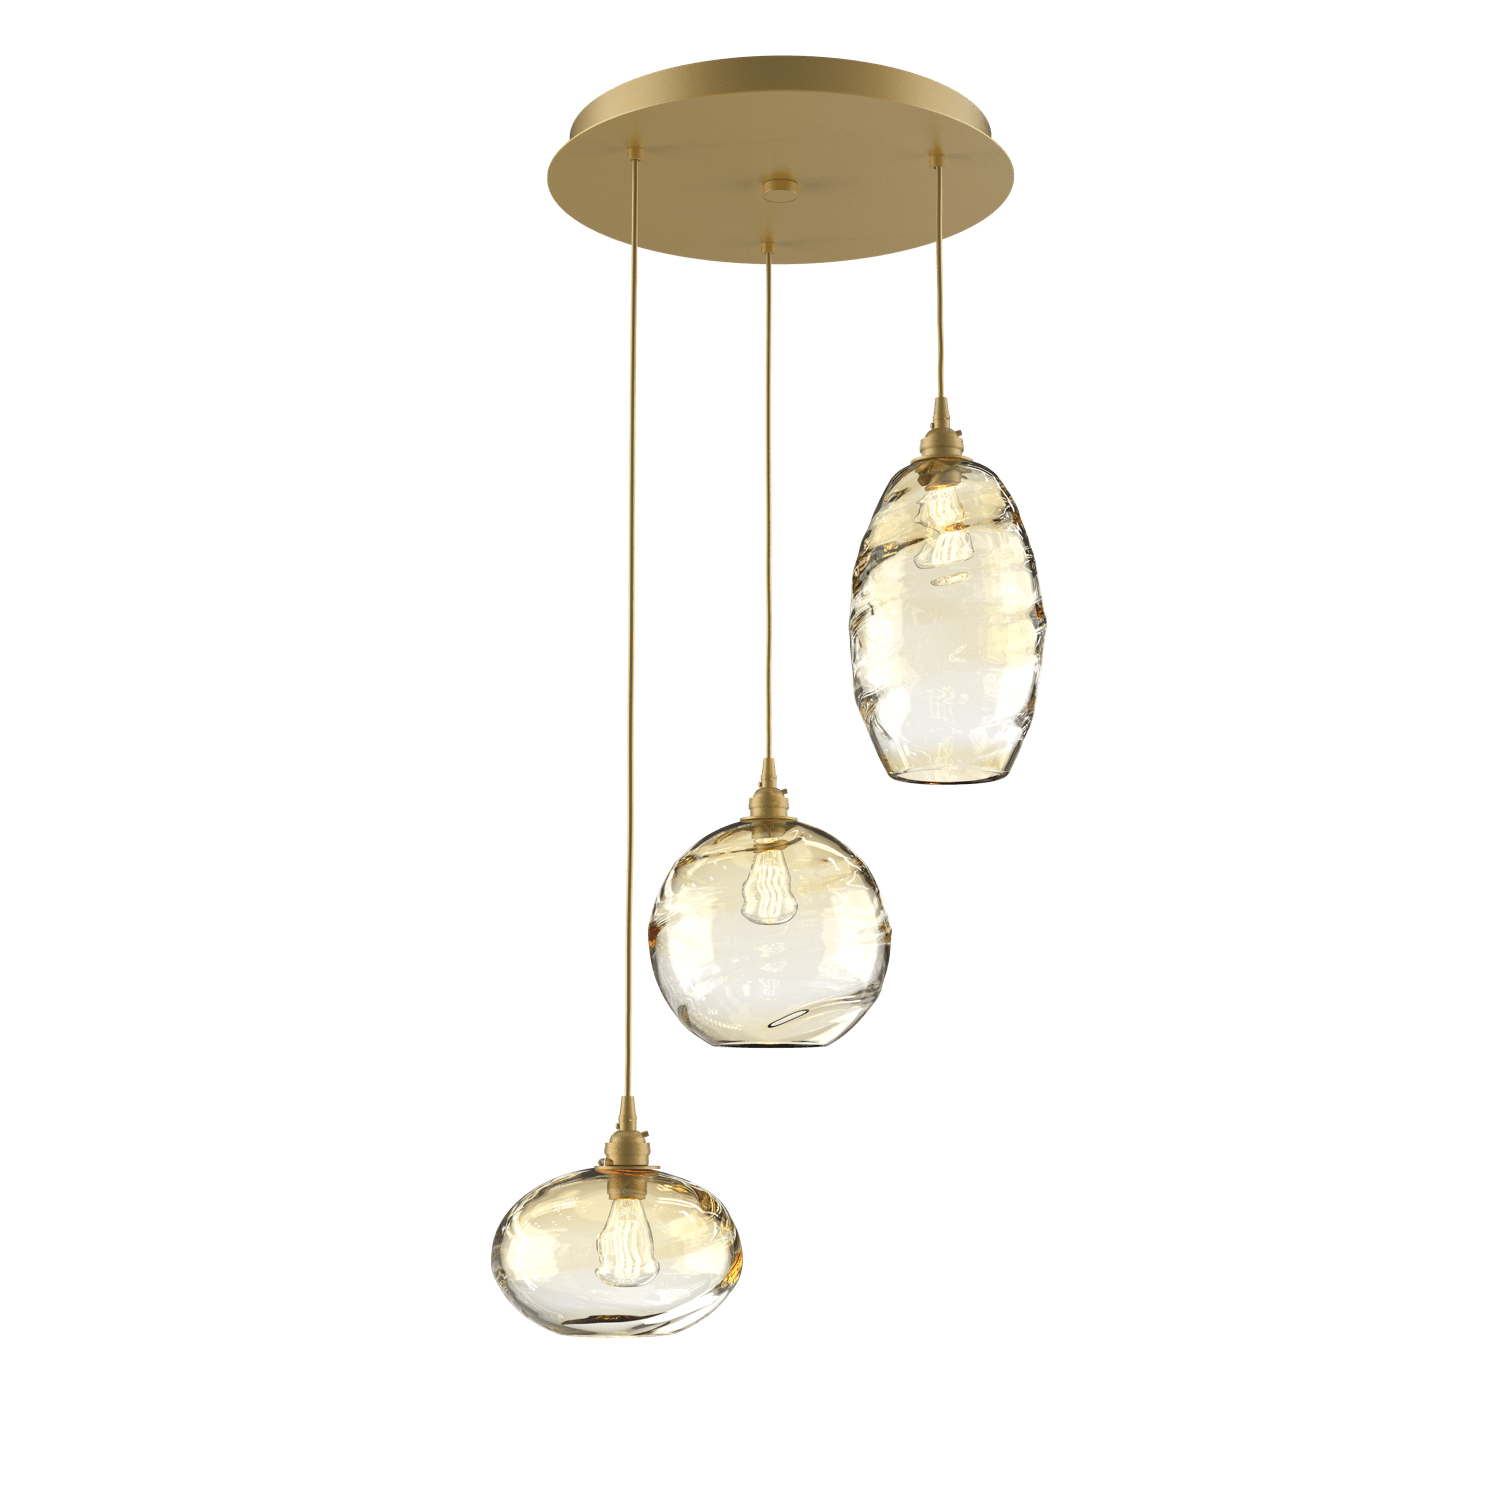 CHB0048-03-GB-OA-Hammerton-Studio-Optic-Blown-Glass-Misto-3-light-round-pendant-chandelier-with-gilded-brass-finish-and-optic-amber-blown-glass-shades-and-incandescent-lamping